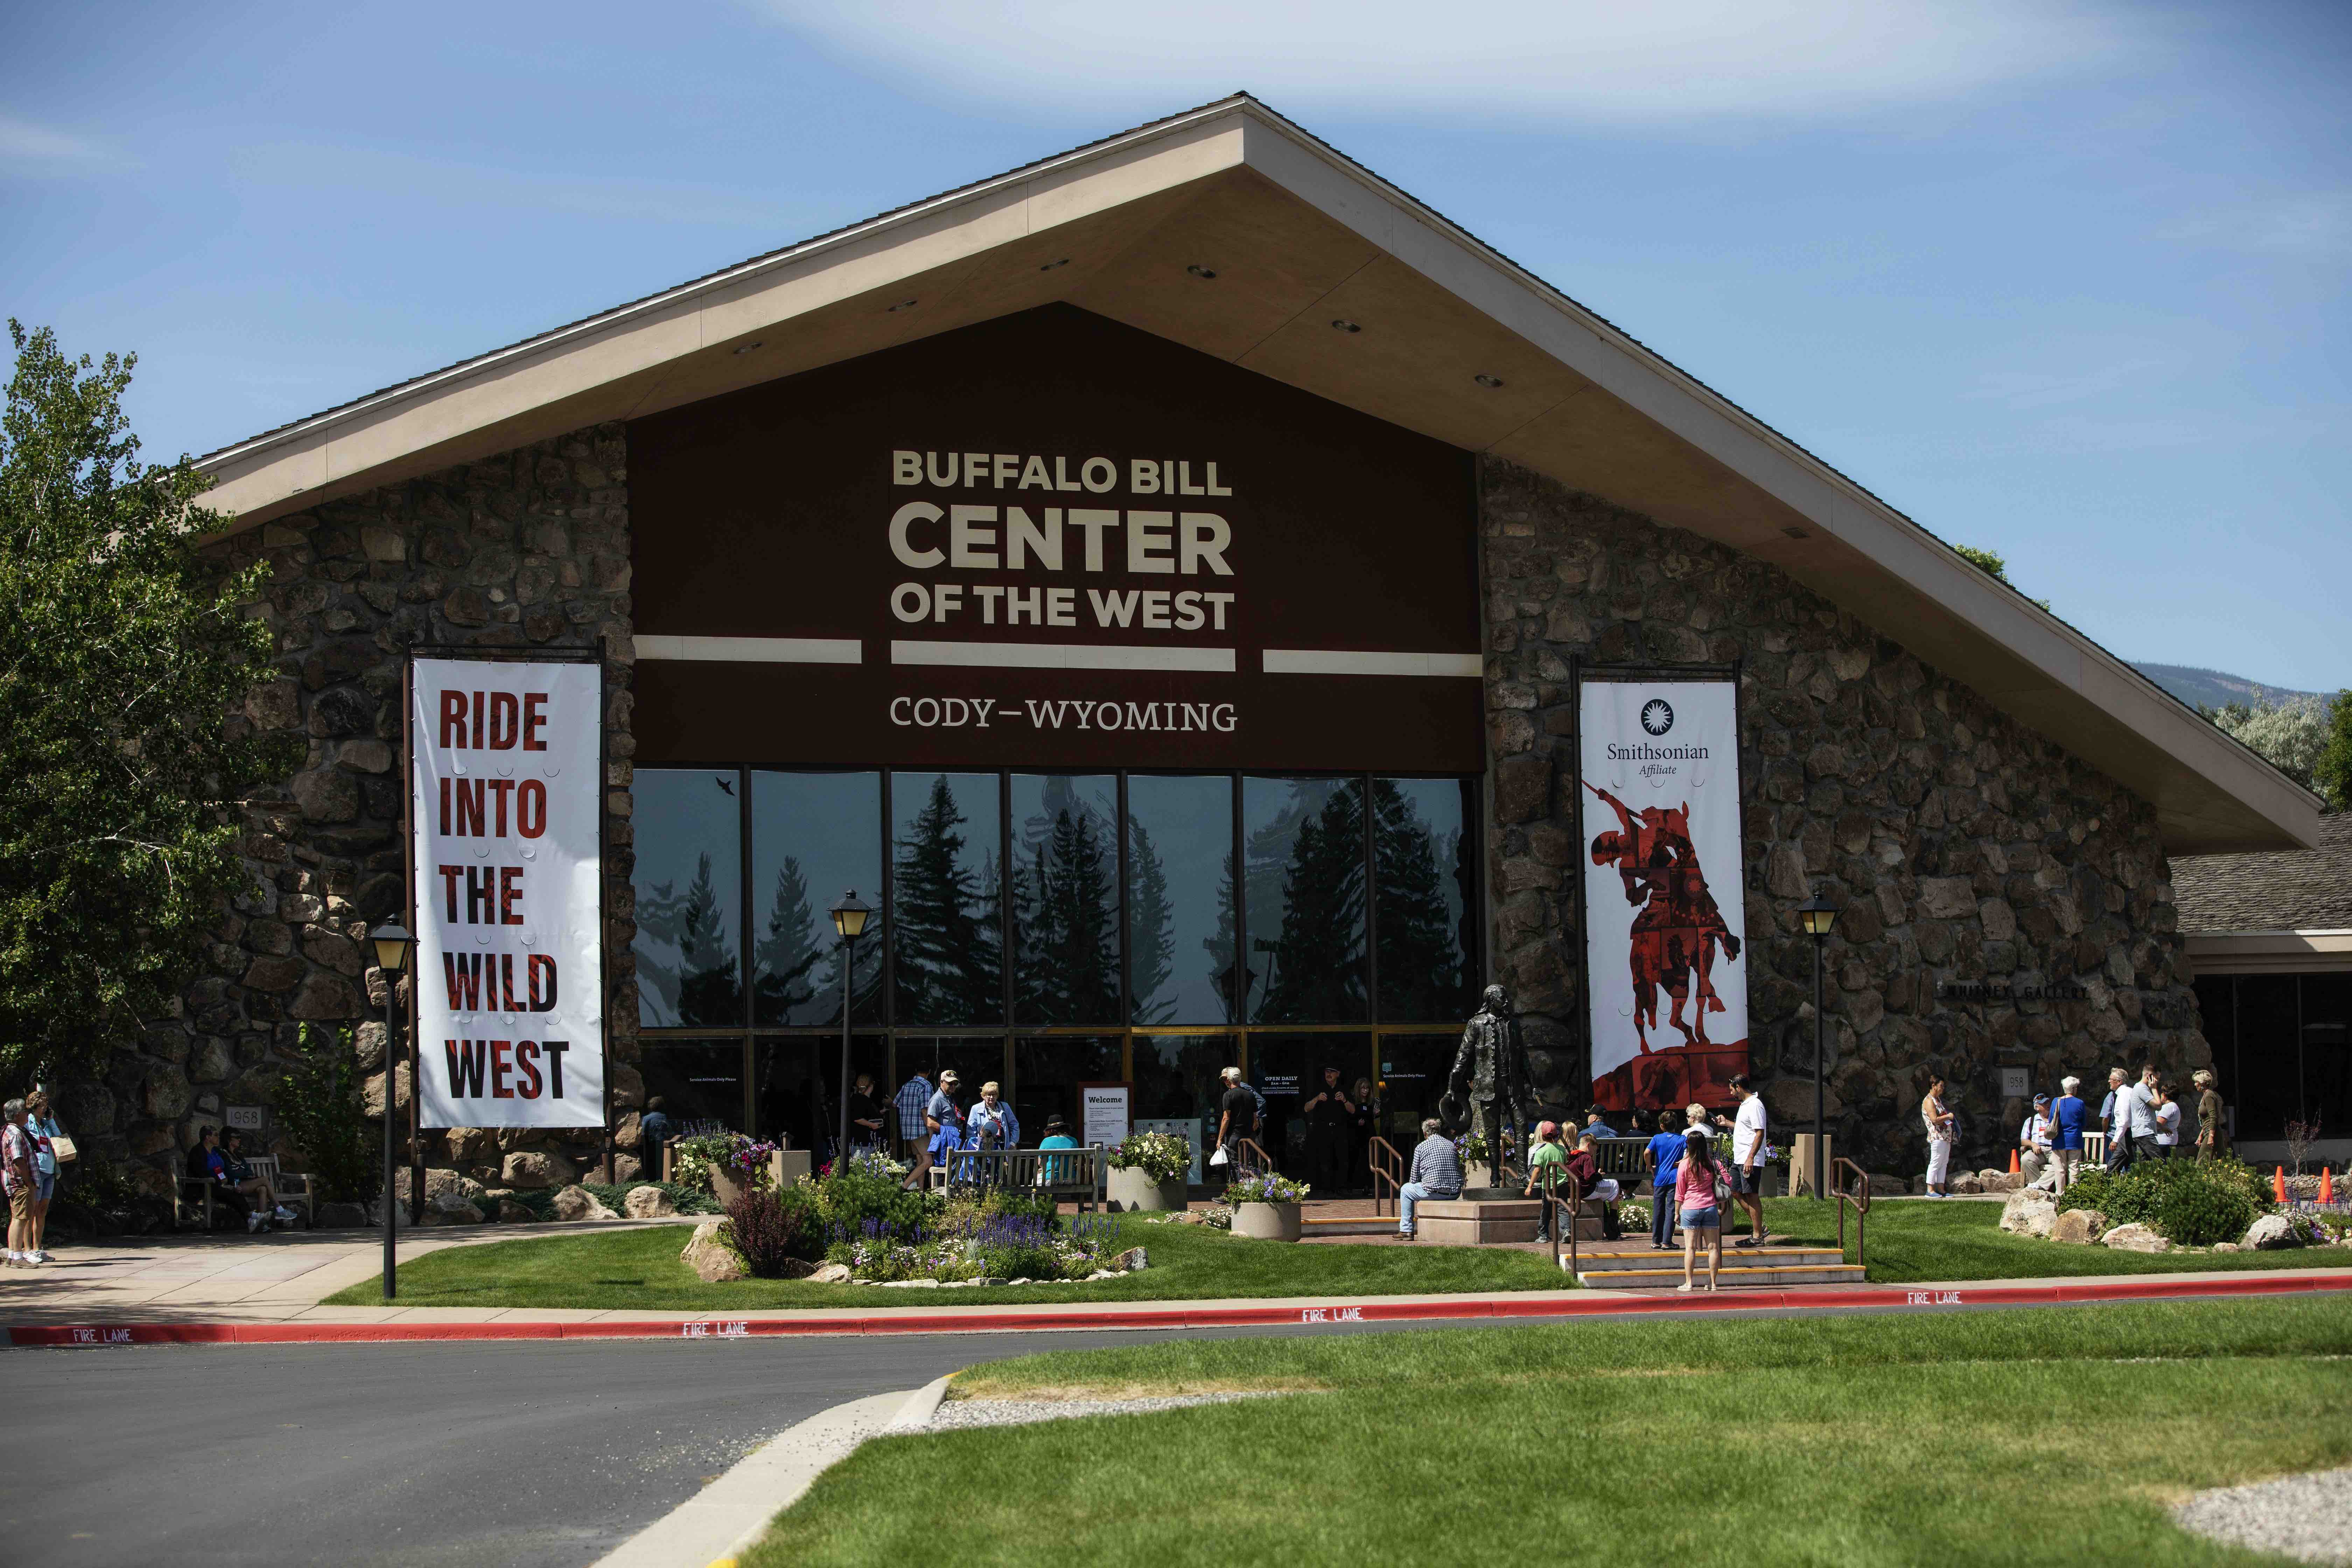 The Buffalo Bill Center of the West on a sunny day in Cody, Wyoming